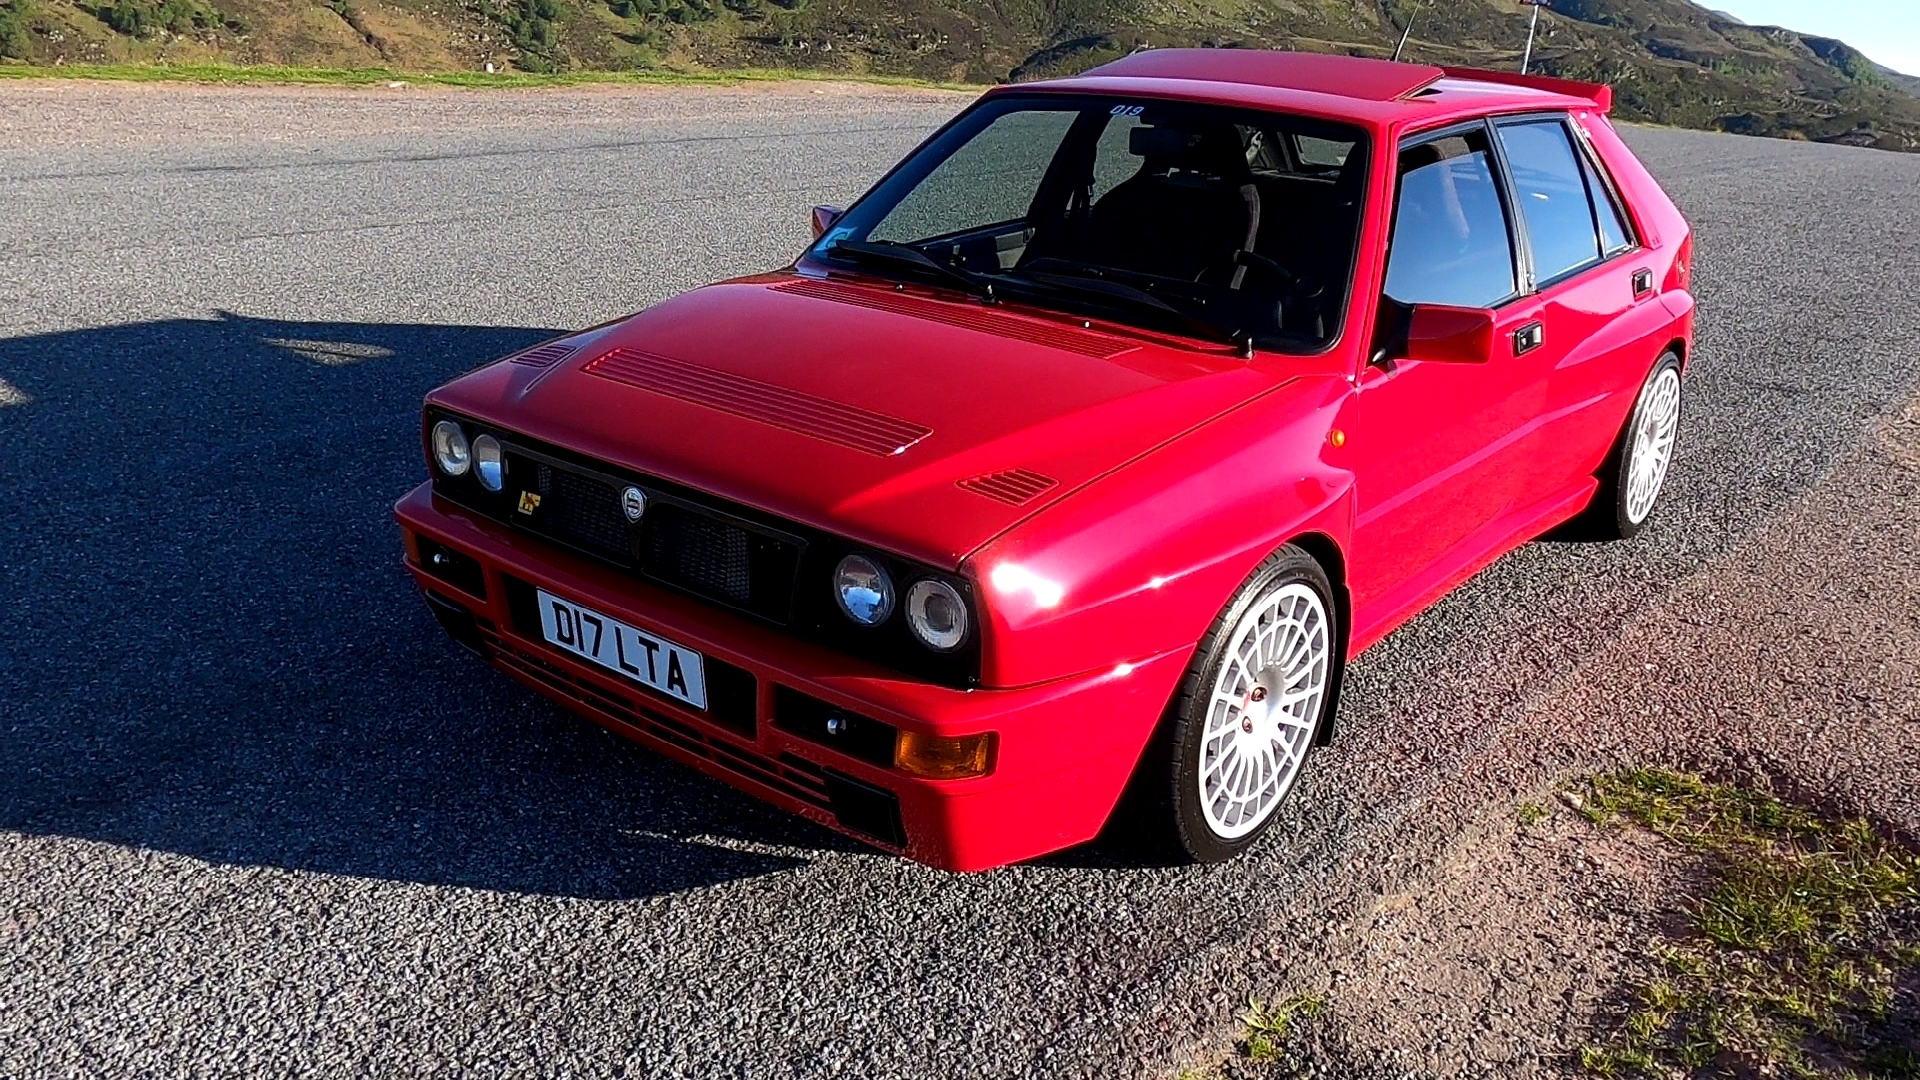 Lancia Delta integrale - Page 1 - Classic Cars and Yesterday's Heroes - PistonHeads